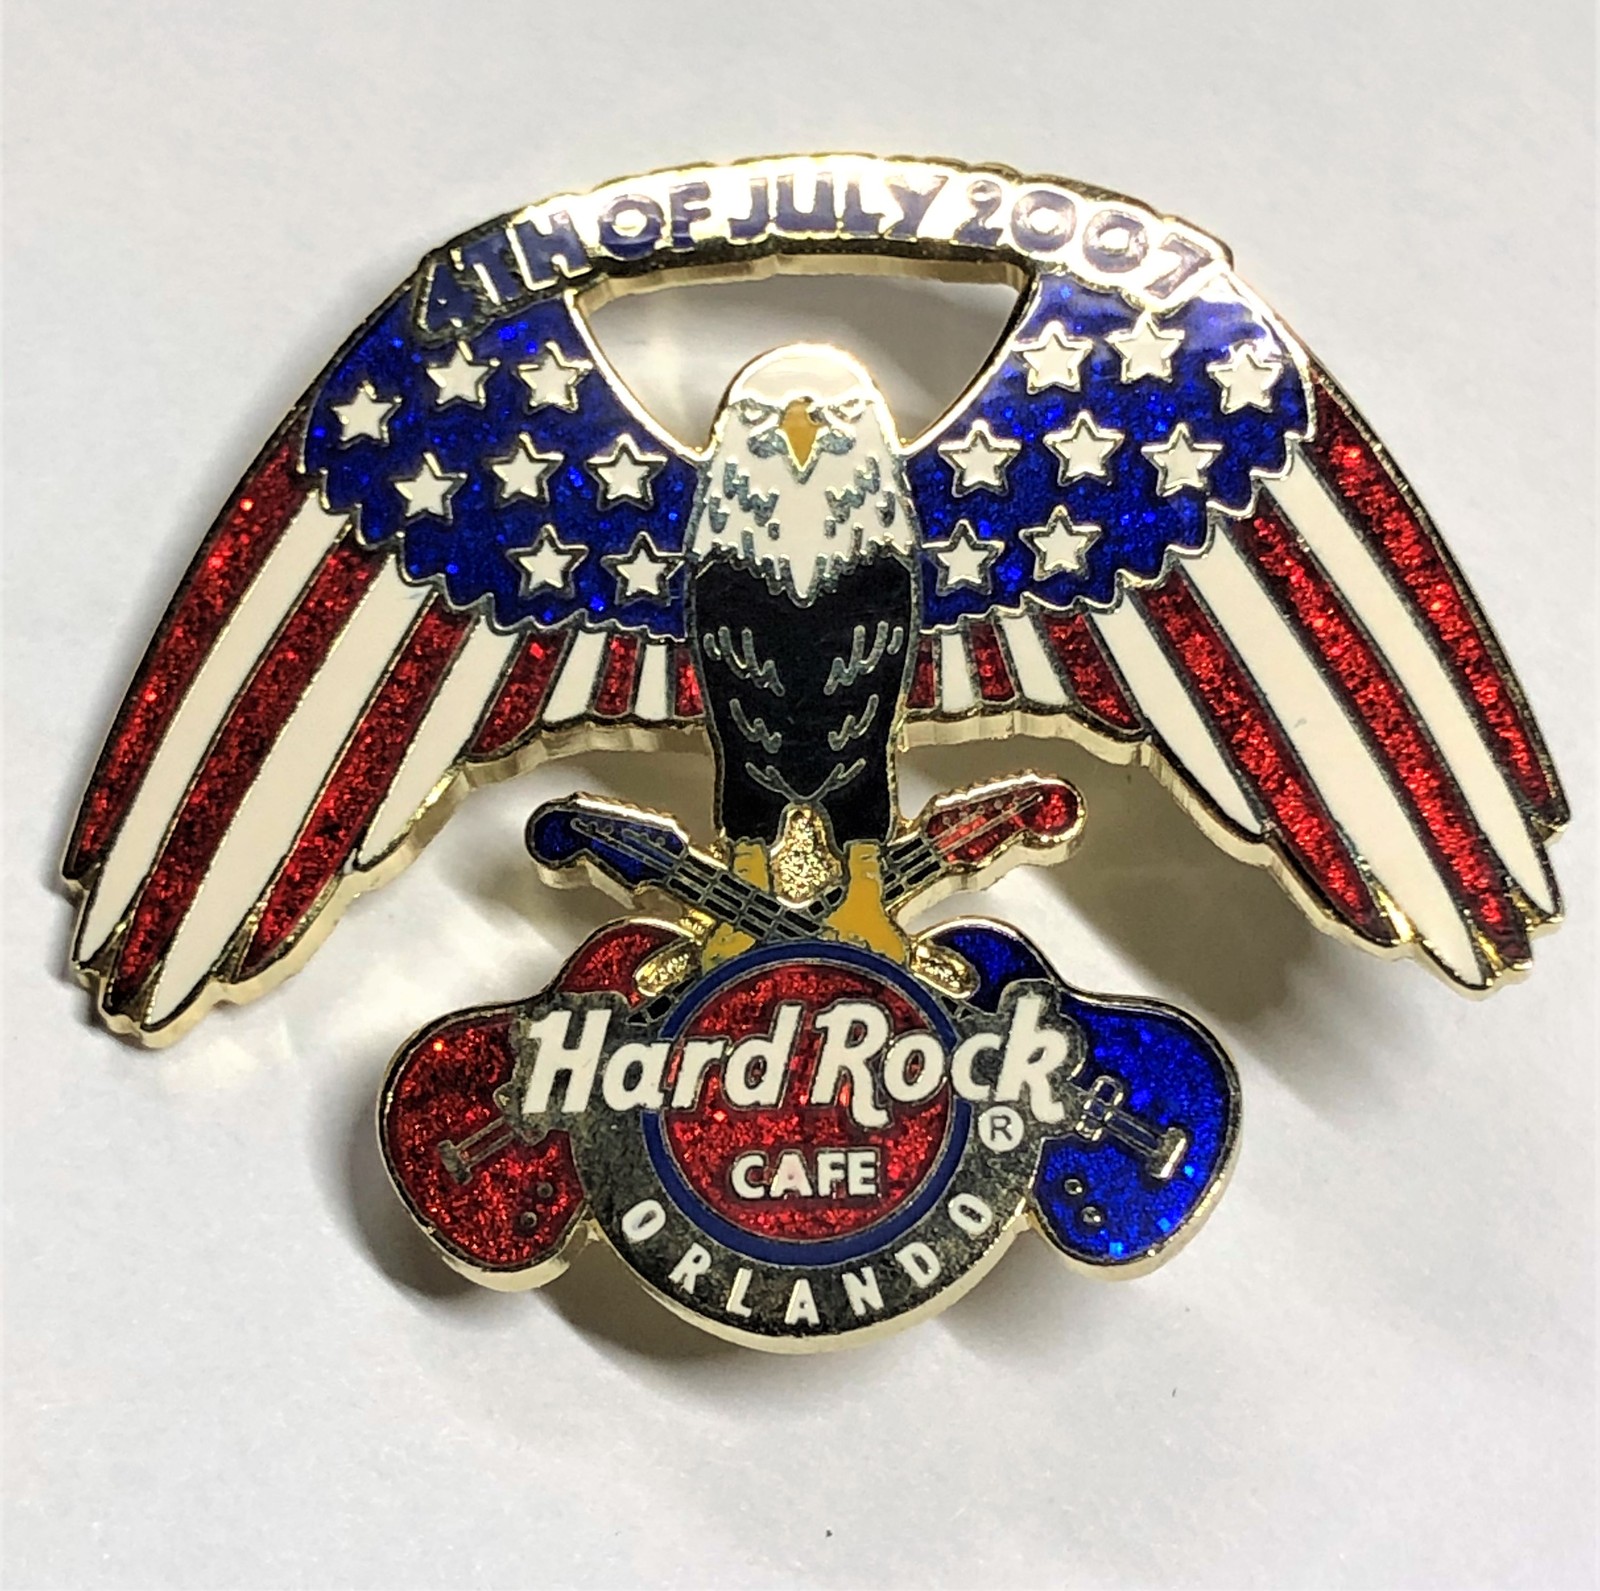 Primary image for Hard Rock Cafe ORLANDO July 4, 2007 American Eagle Pin